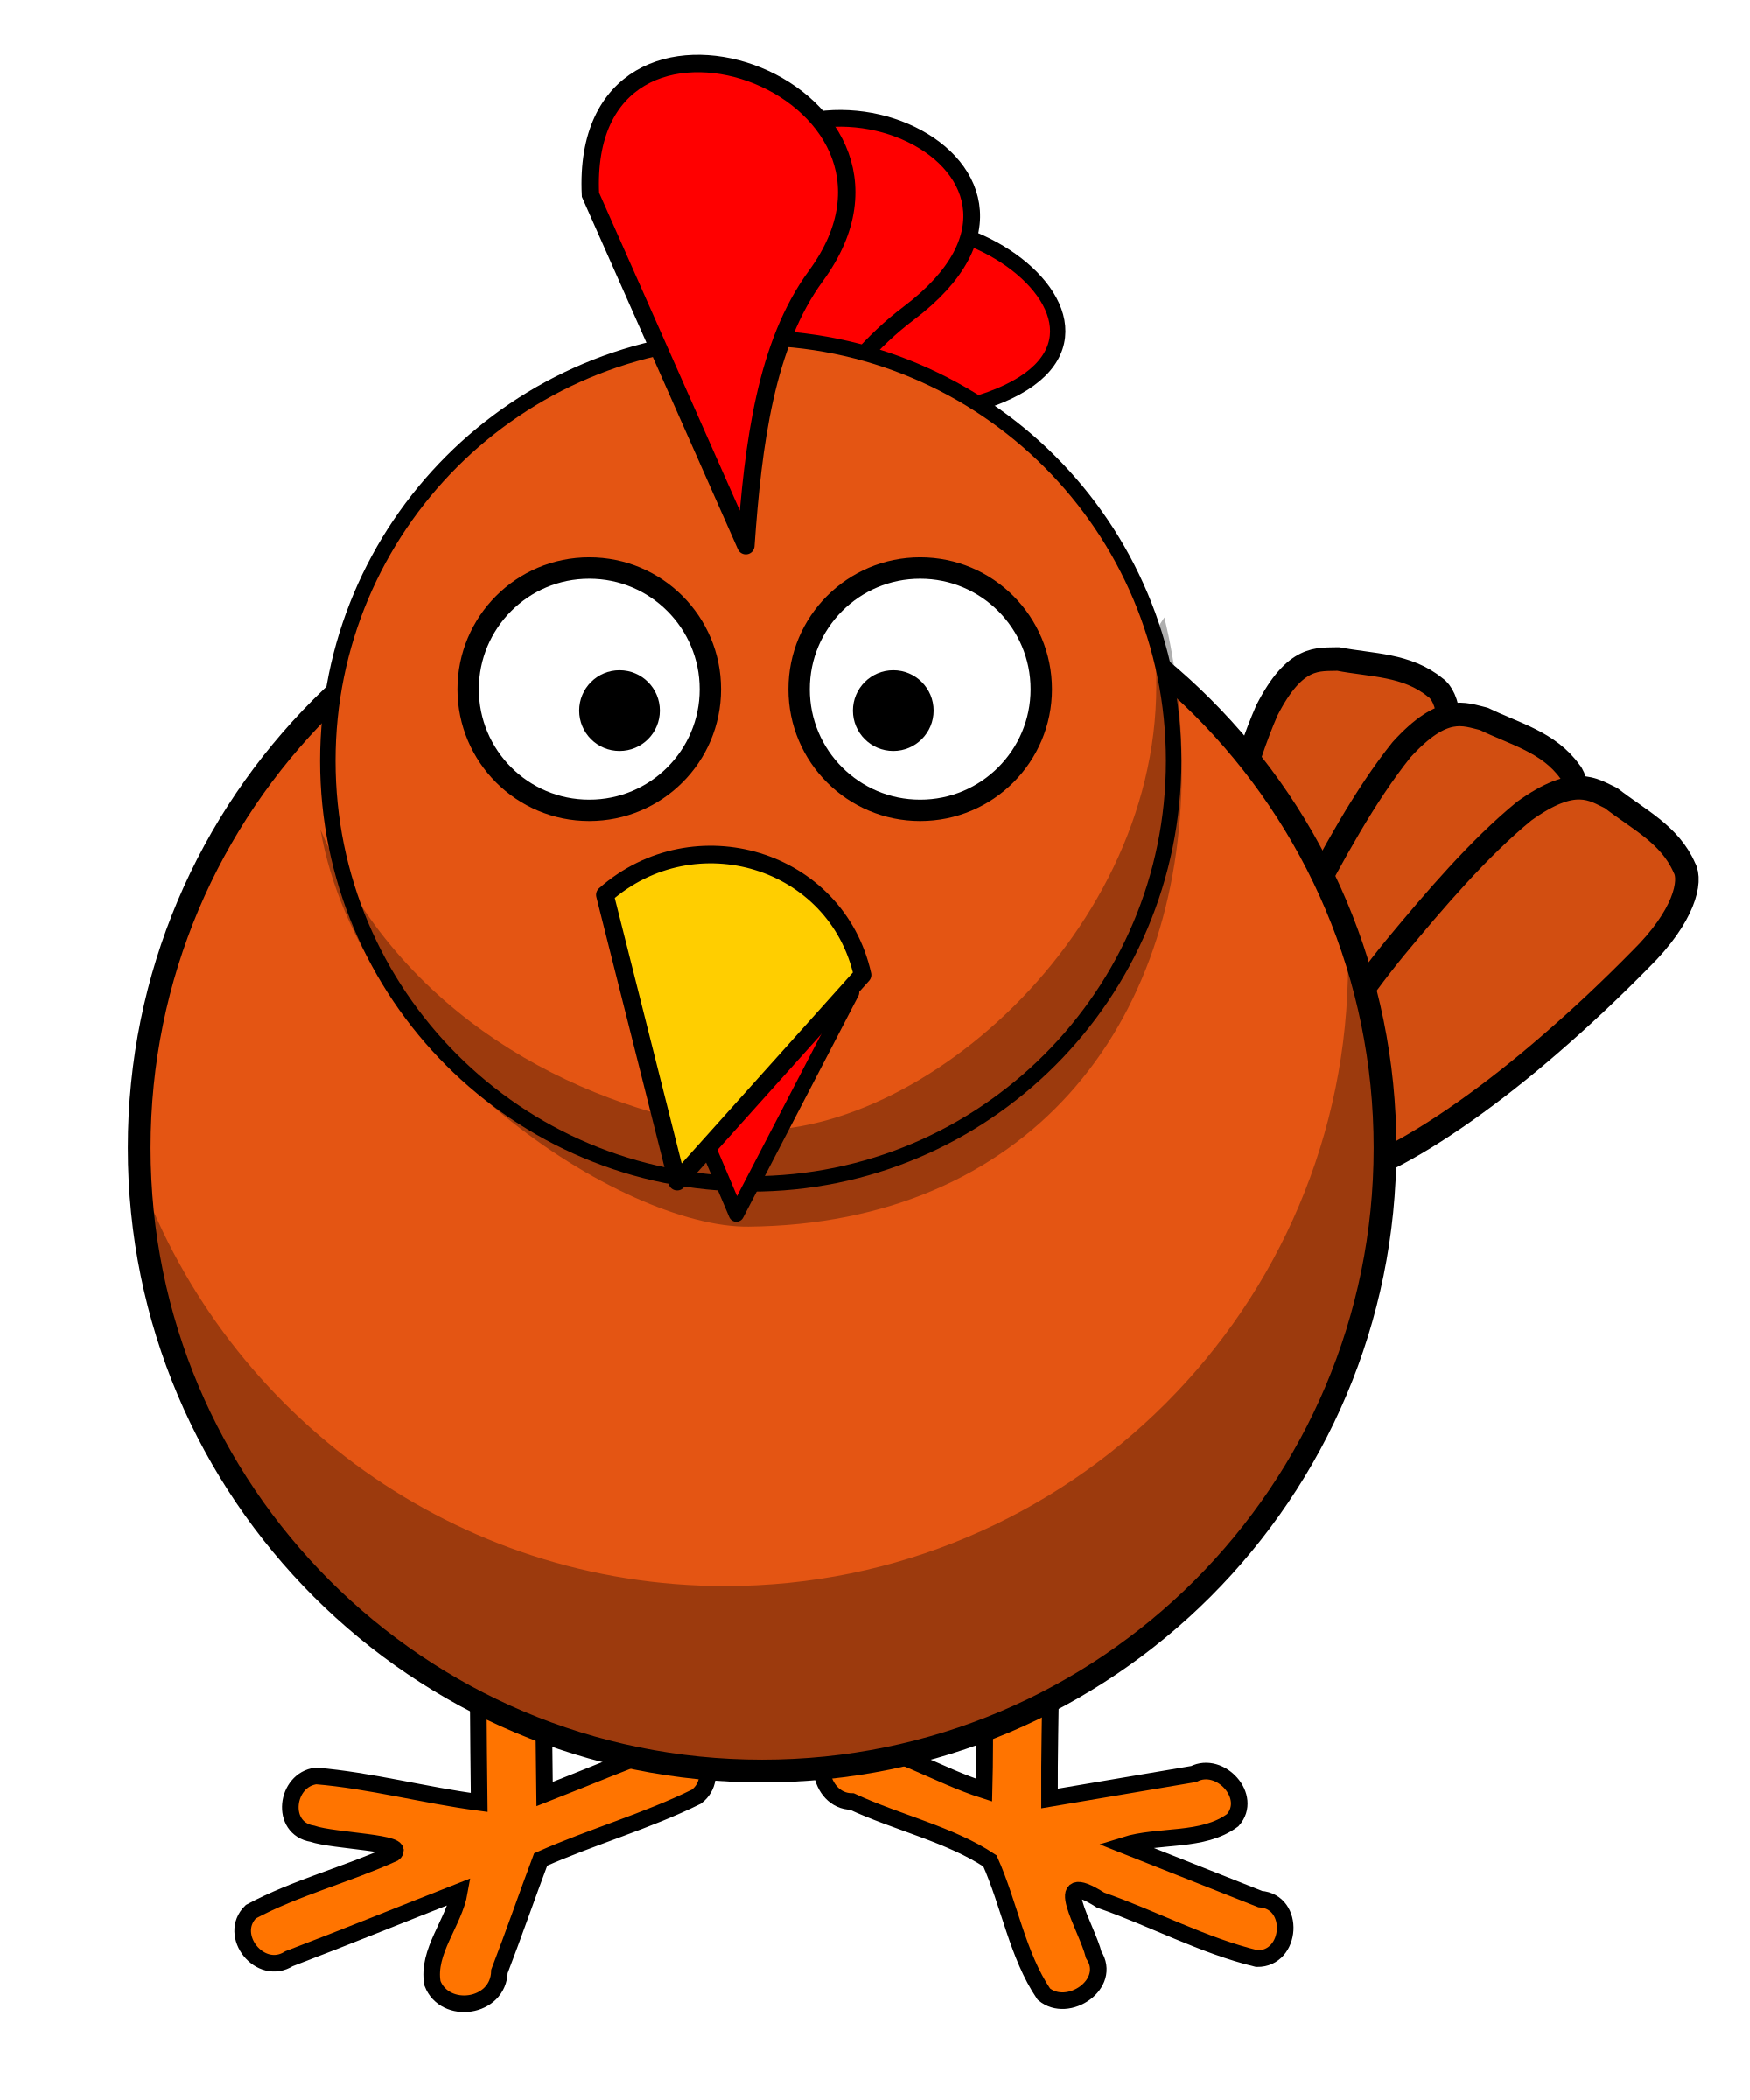 clipart of fried chicken - photo #44